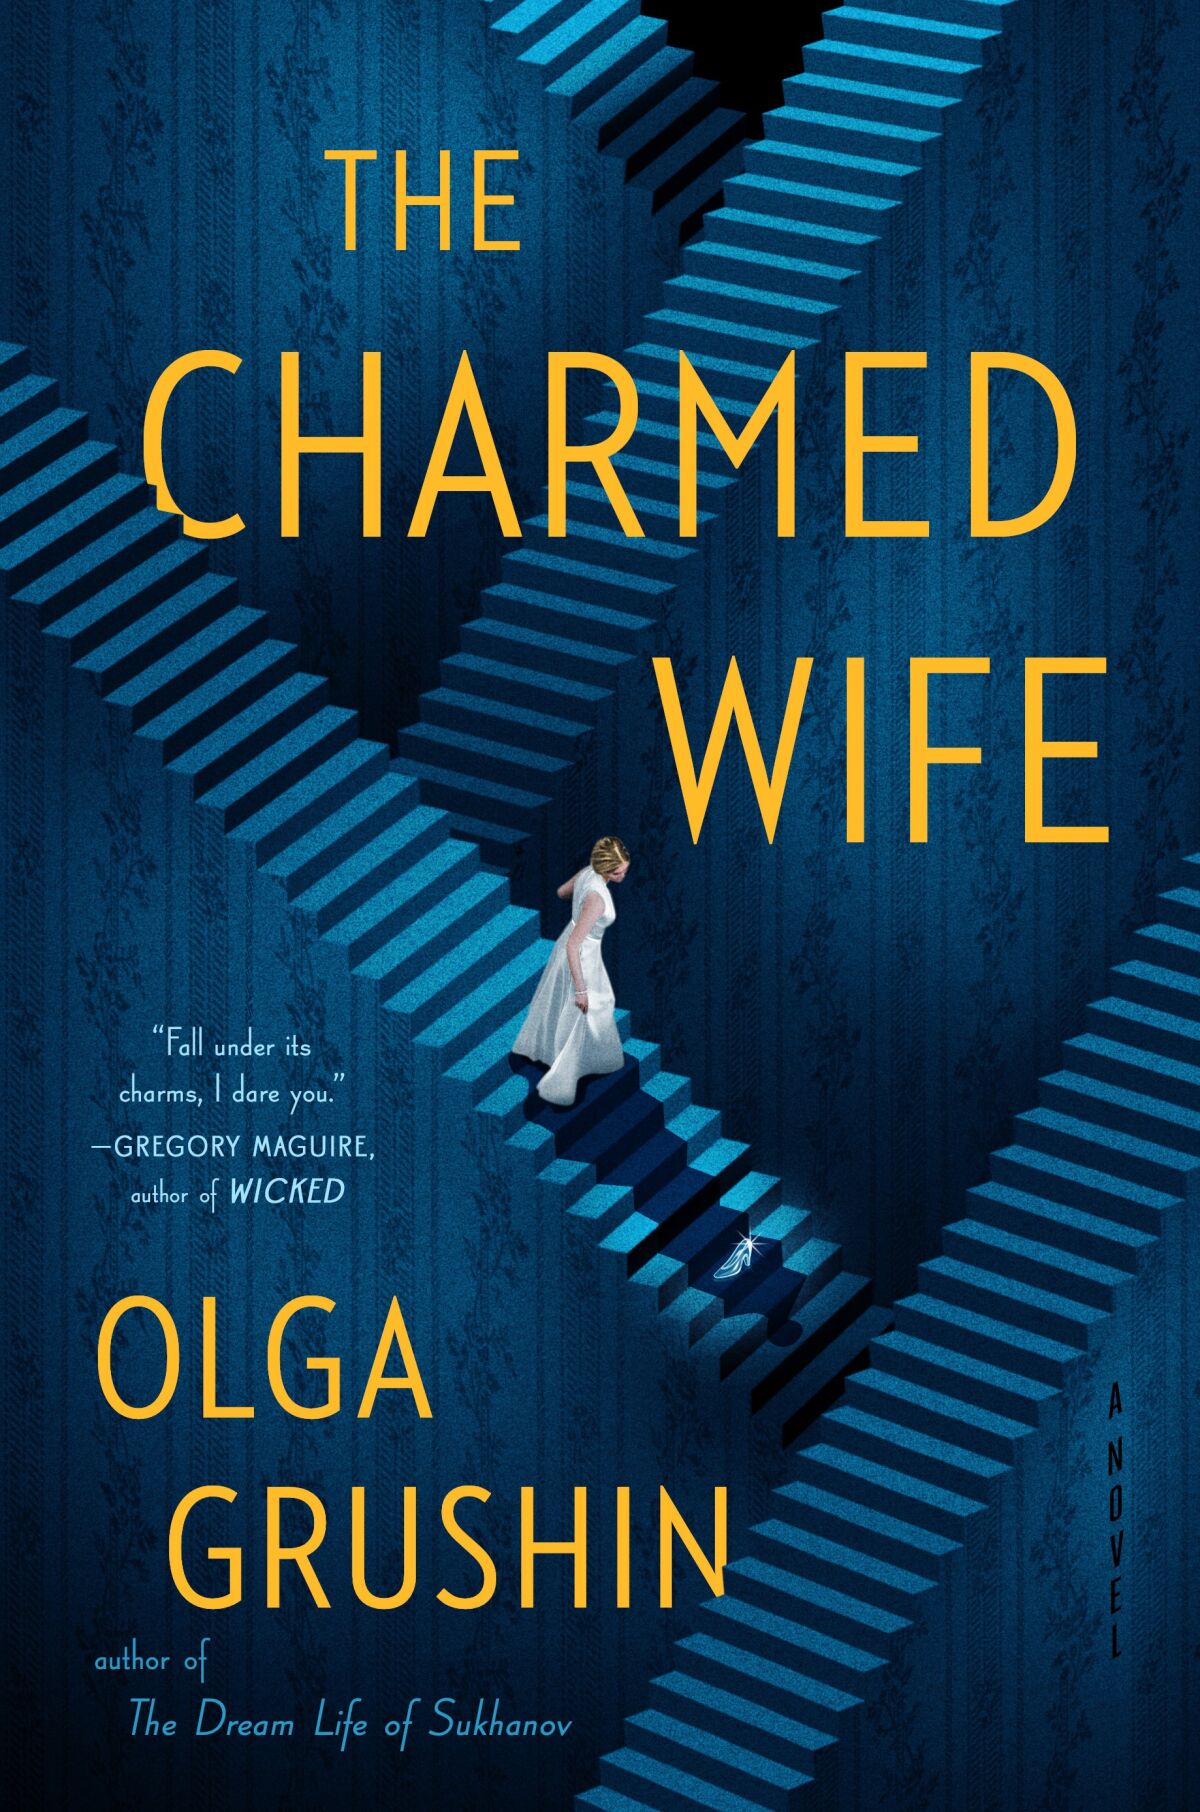 Book cover for "The Charmed Wife," by Olga Grushin.